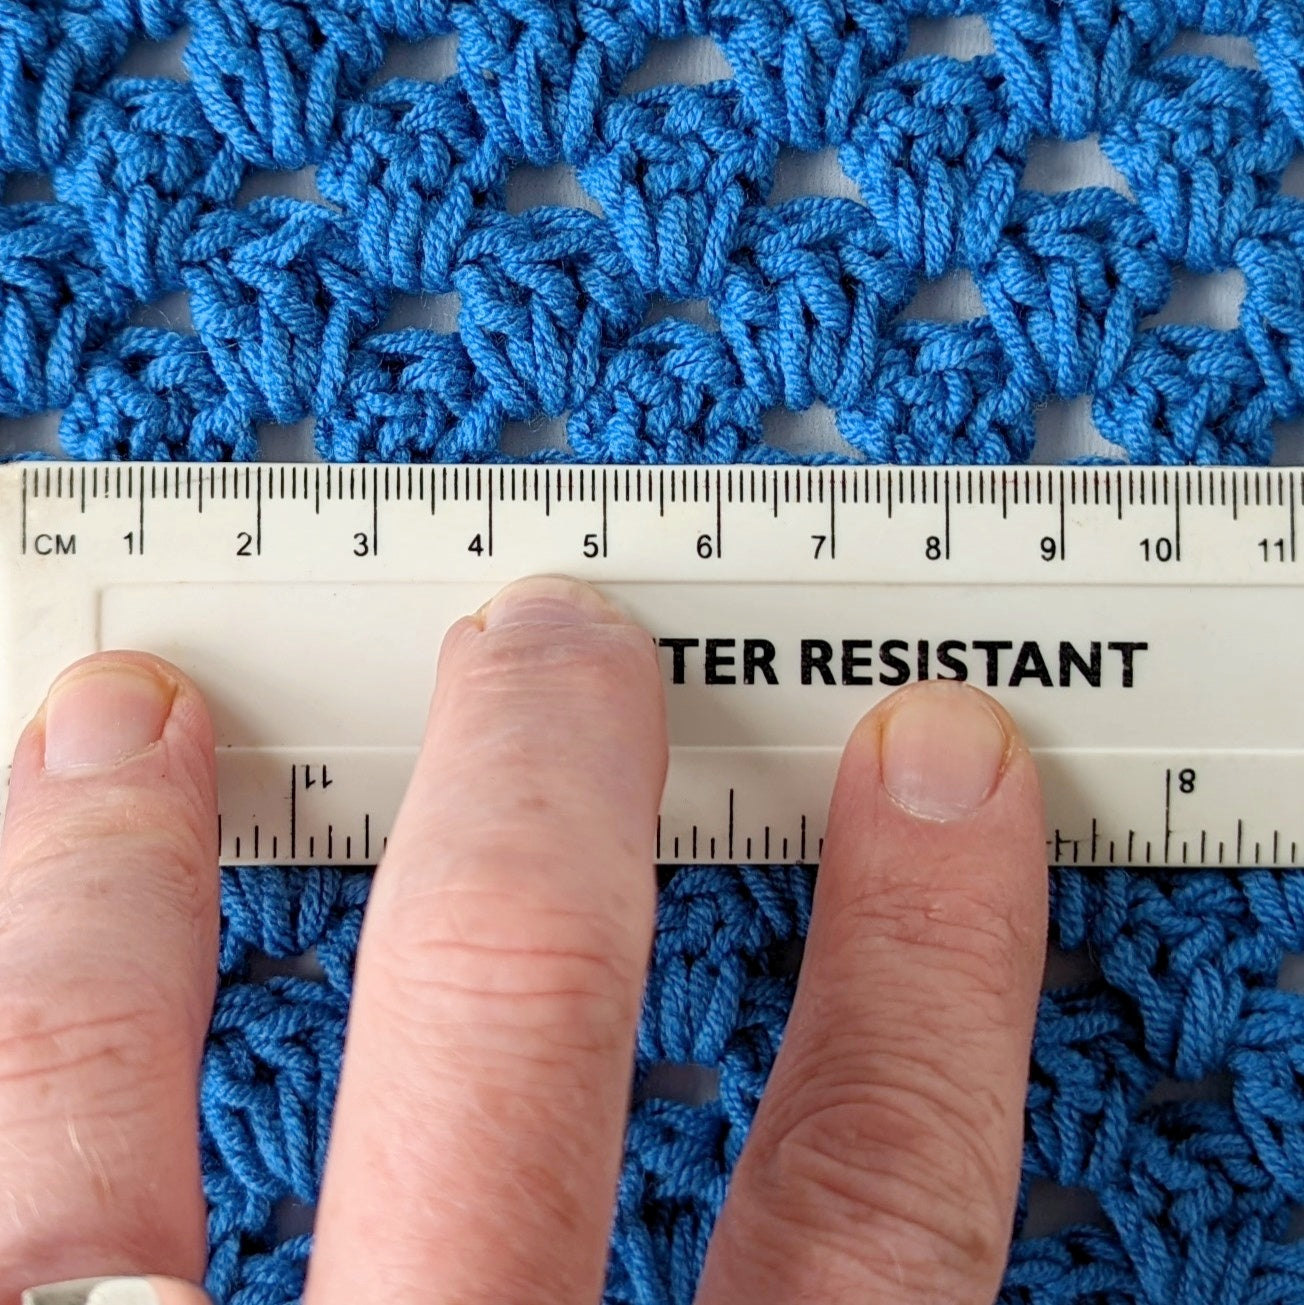 Measuring your granny stitch swatch